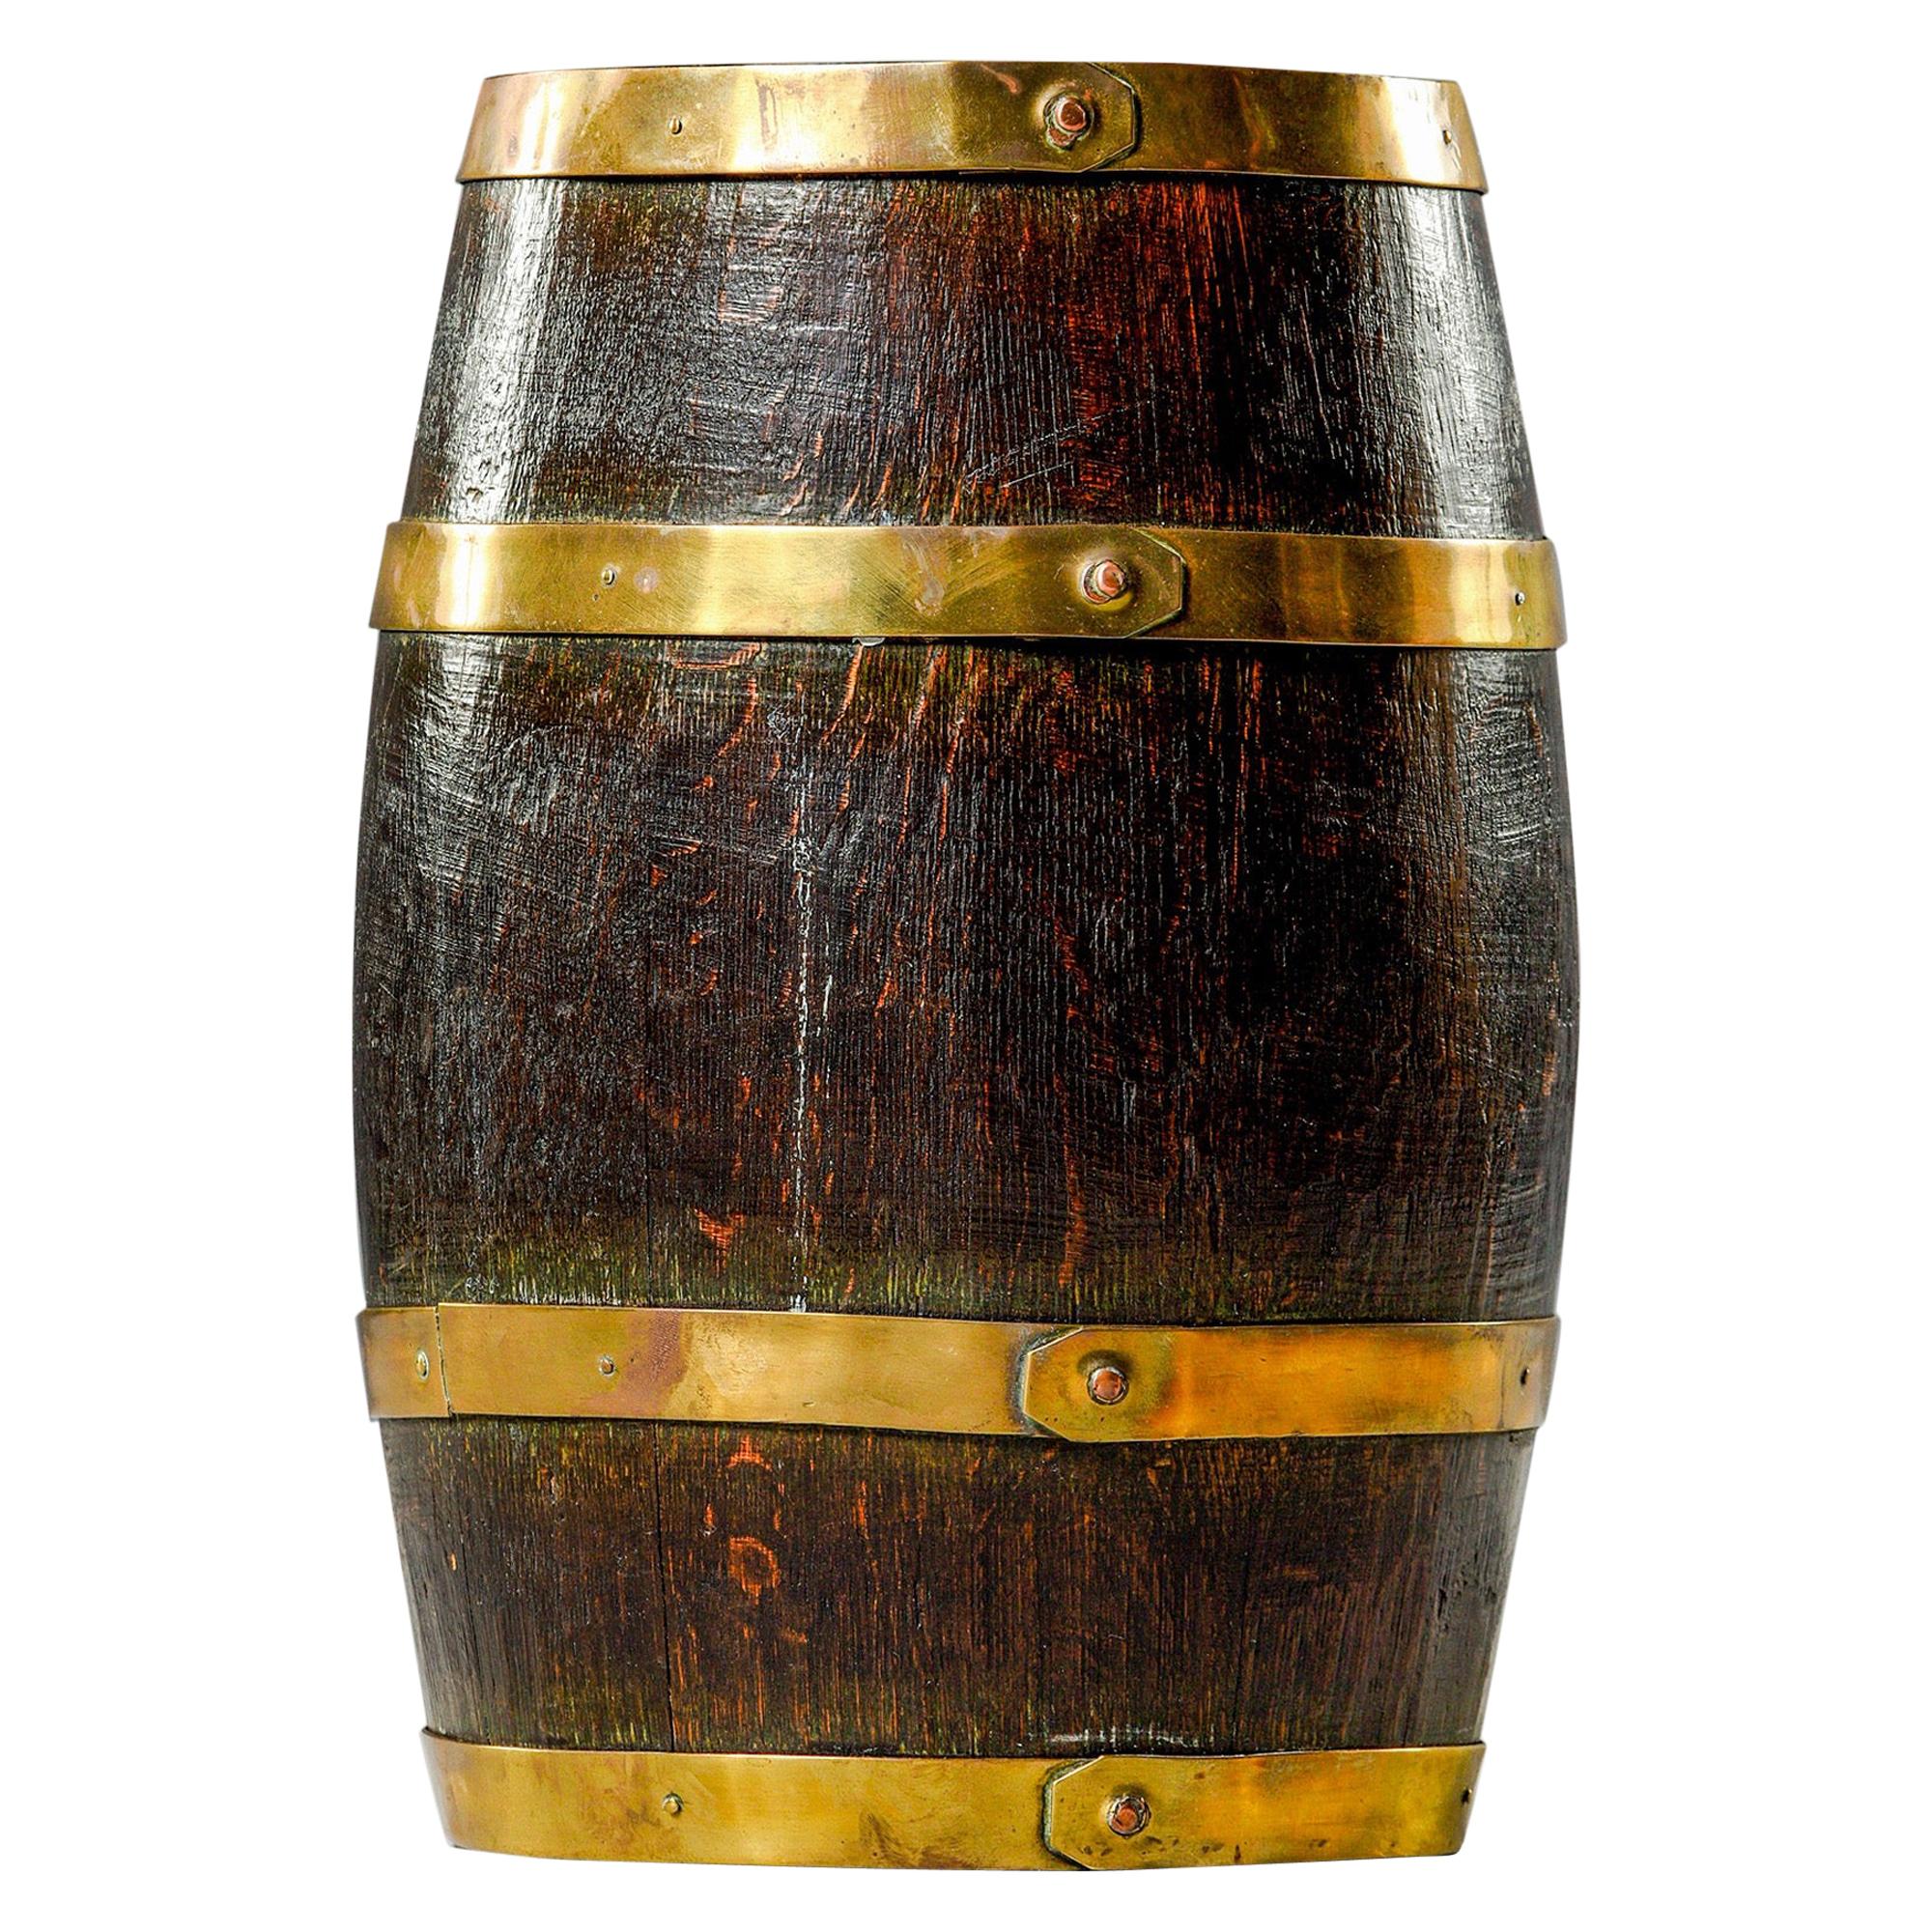 Early 20th Century English Oak Barrel with Four Brass Bands